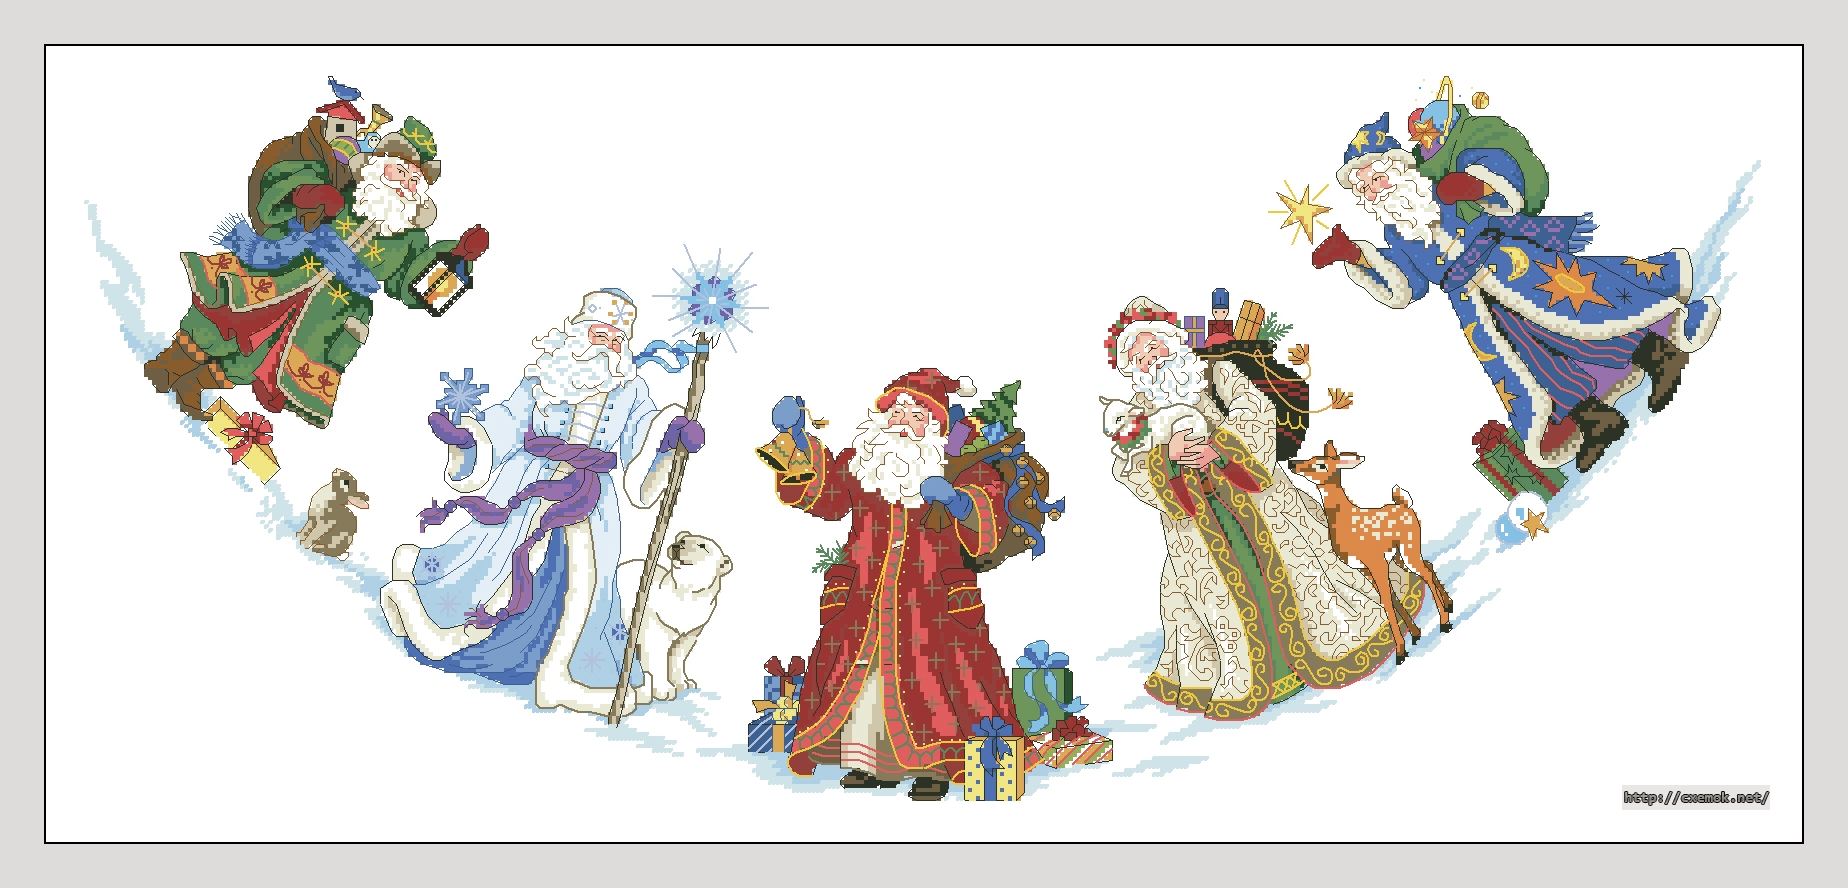 Download embroidery patterns by cross-stitch  - St''nicholas tree skirt, author 